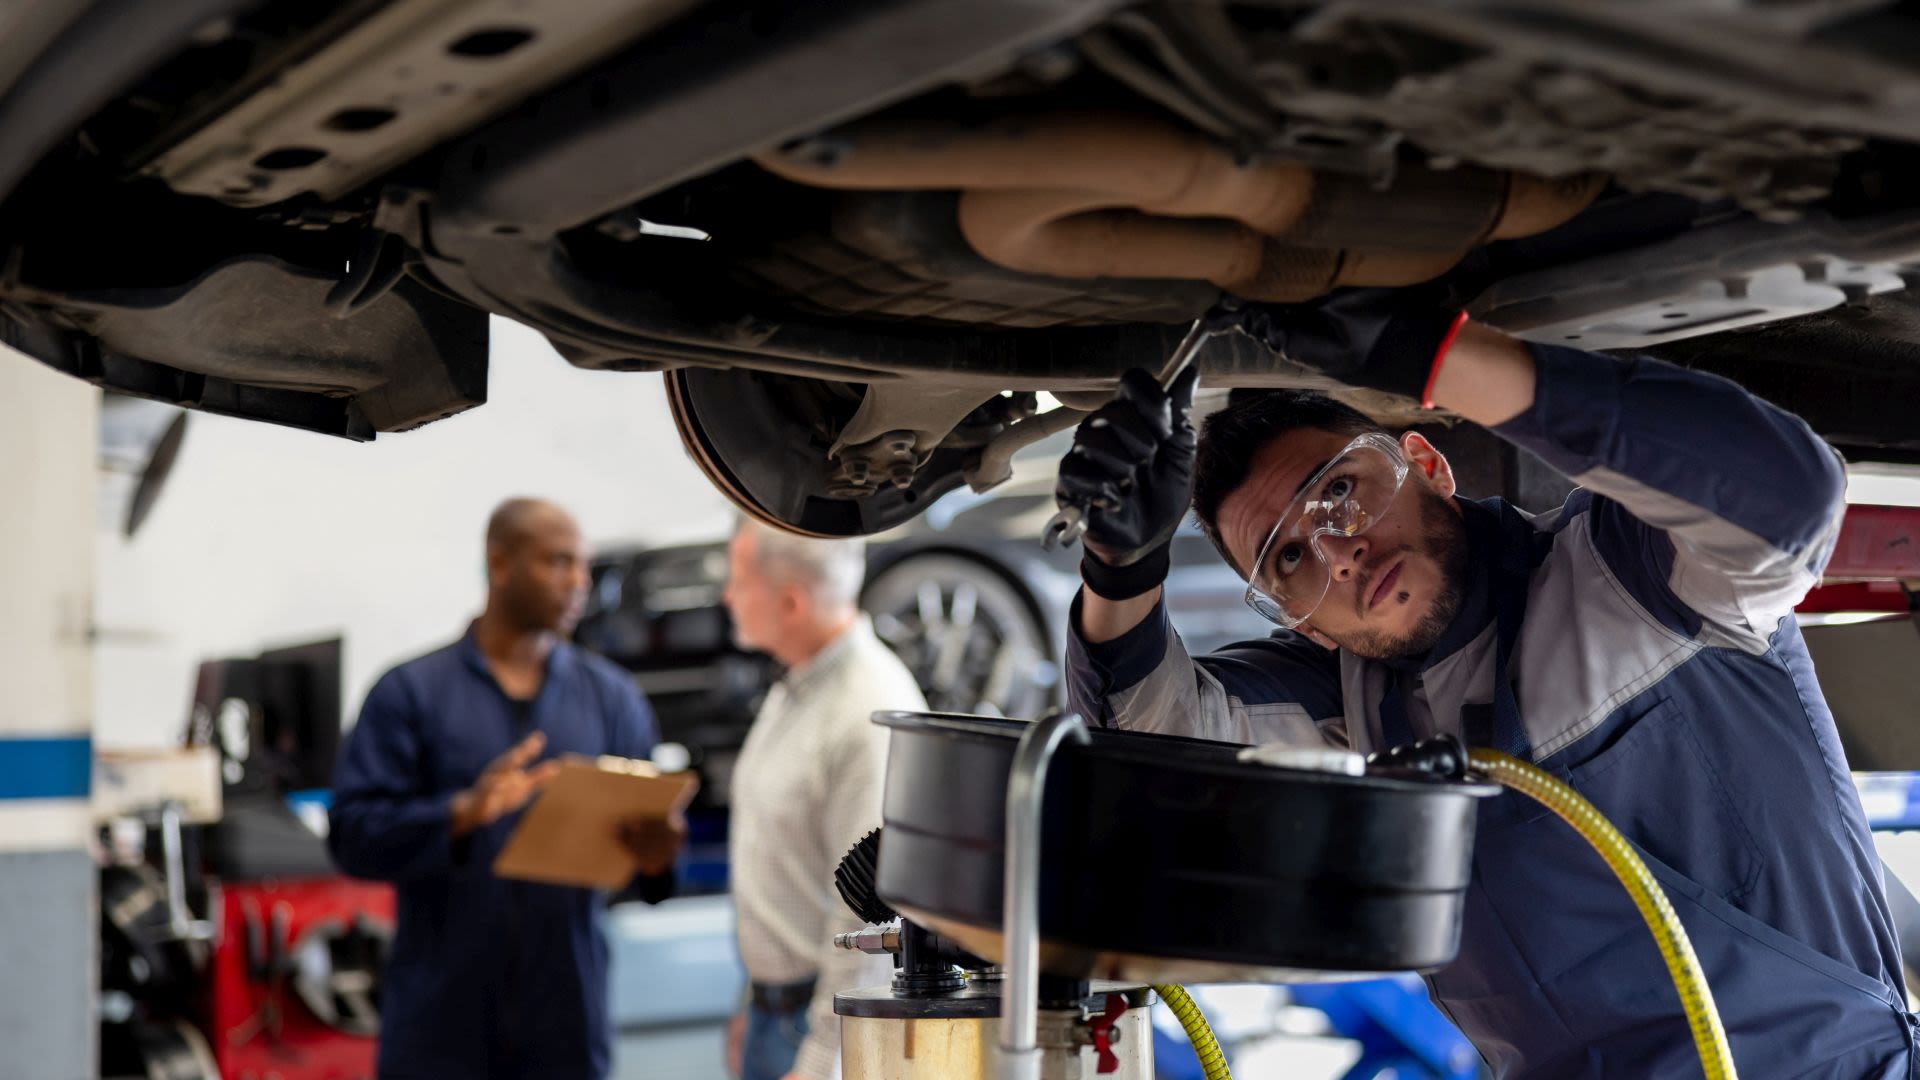 Auto Experts: Here Are 5 Money-Saving Car Upgrades To Make Before Summer